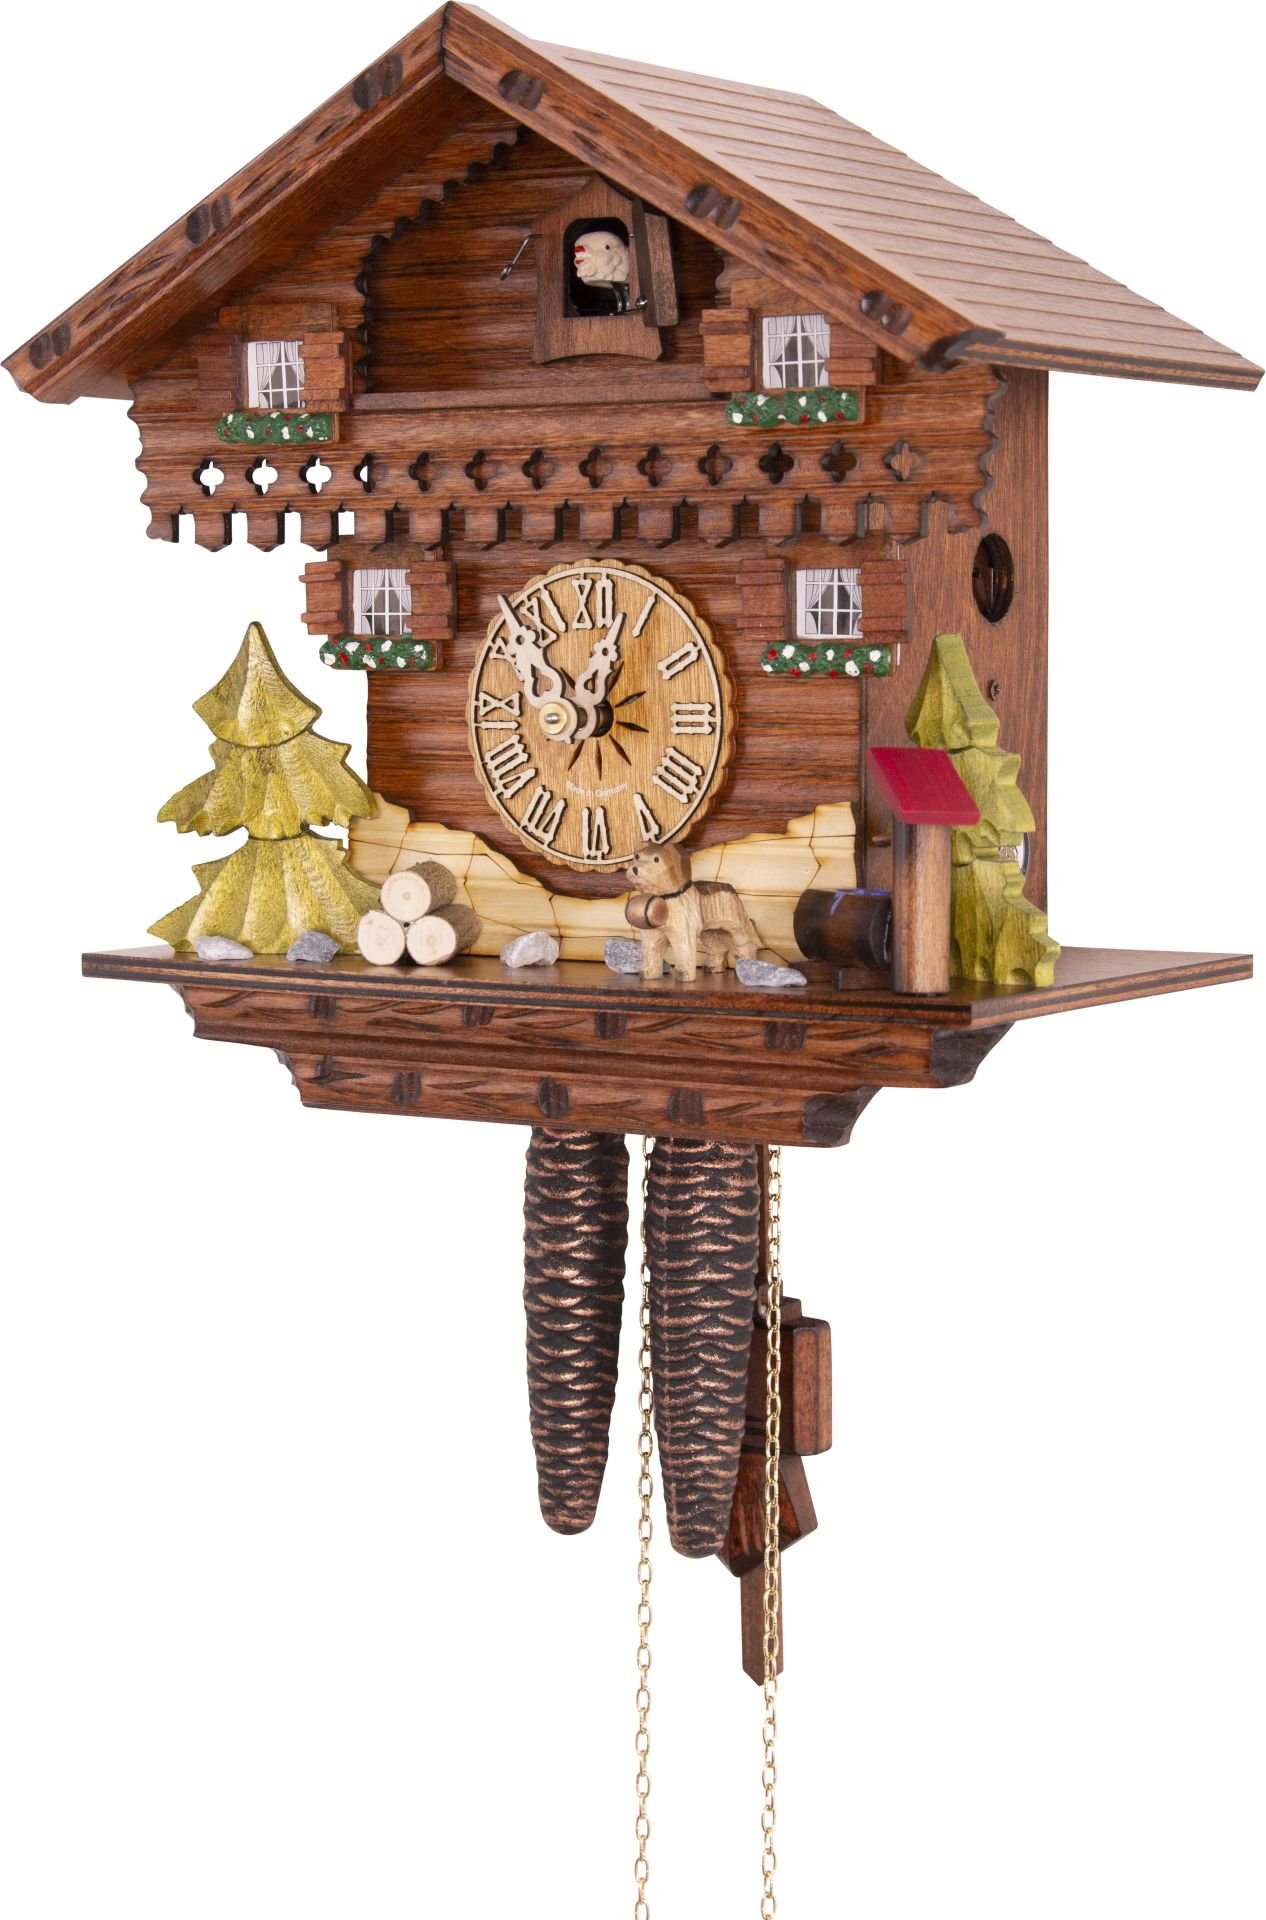 Cuckoo Clock Chalet Style 1 Day Movement 24cm by Hekas